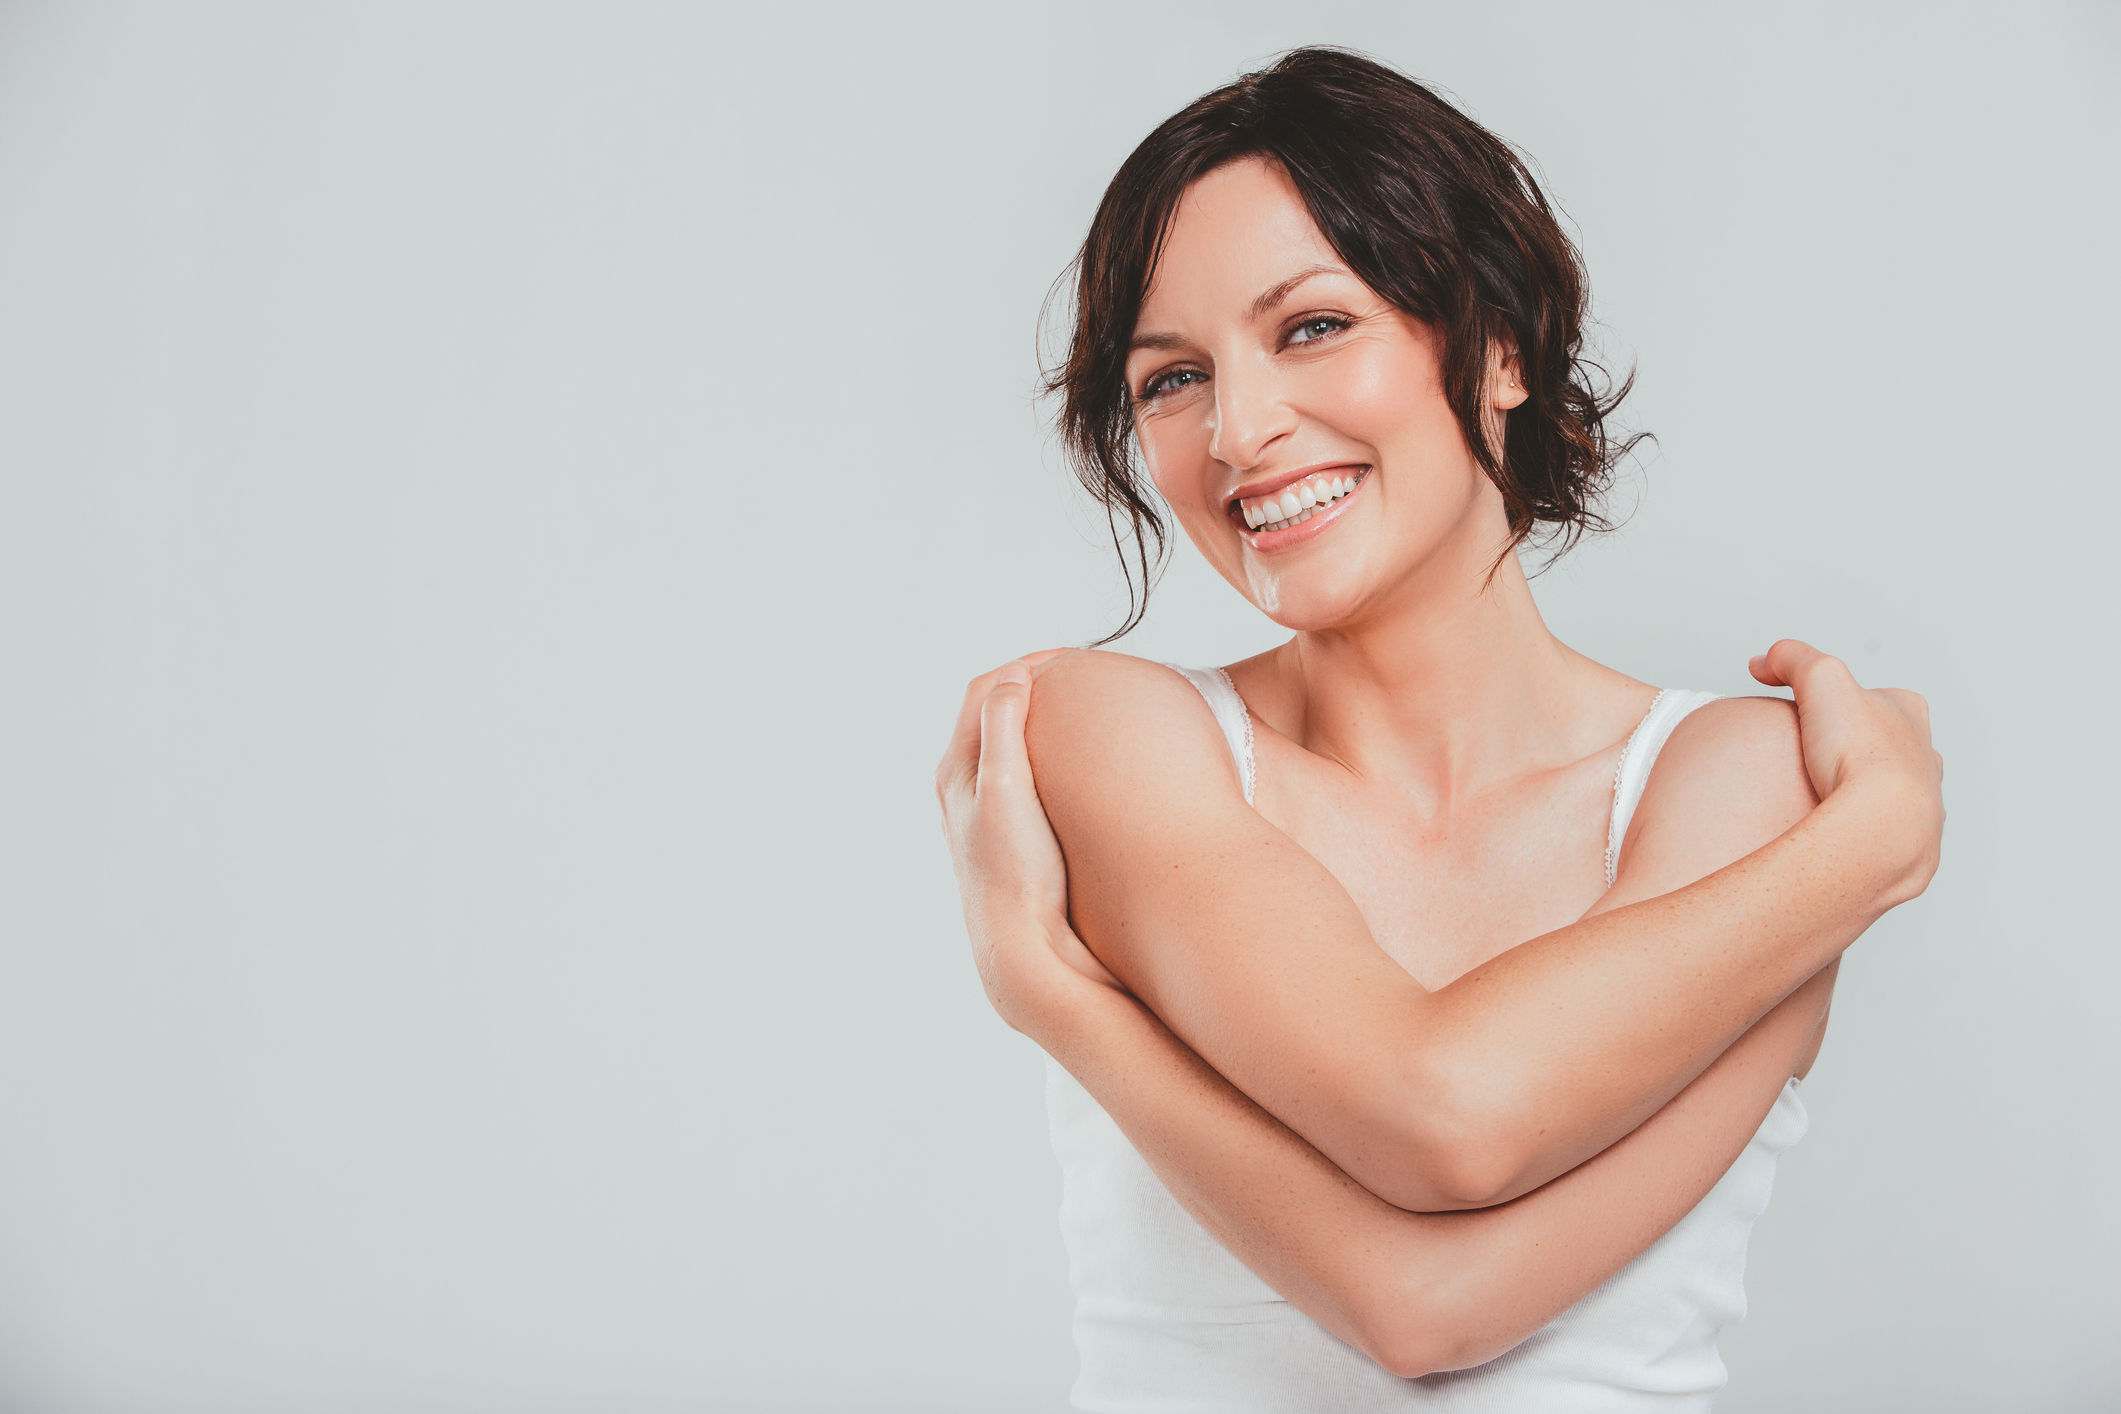 Woman hugging herself while smiling